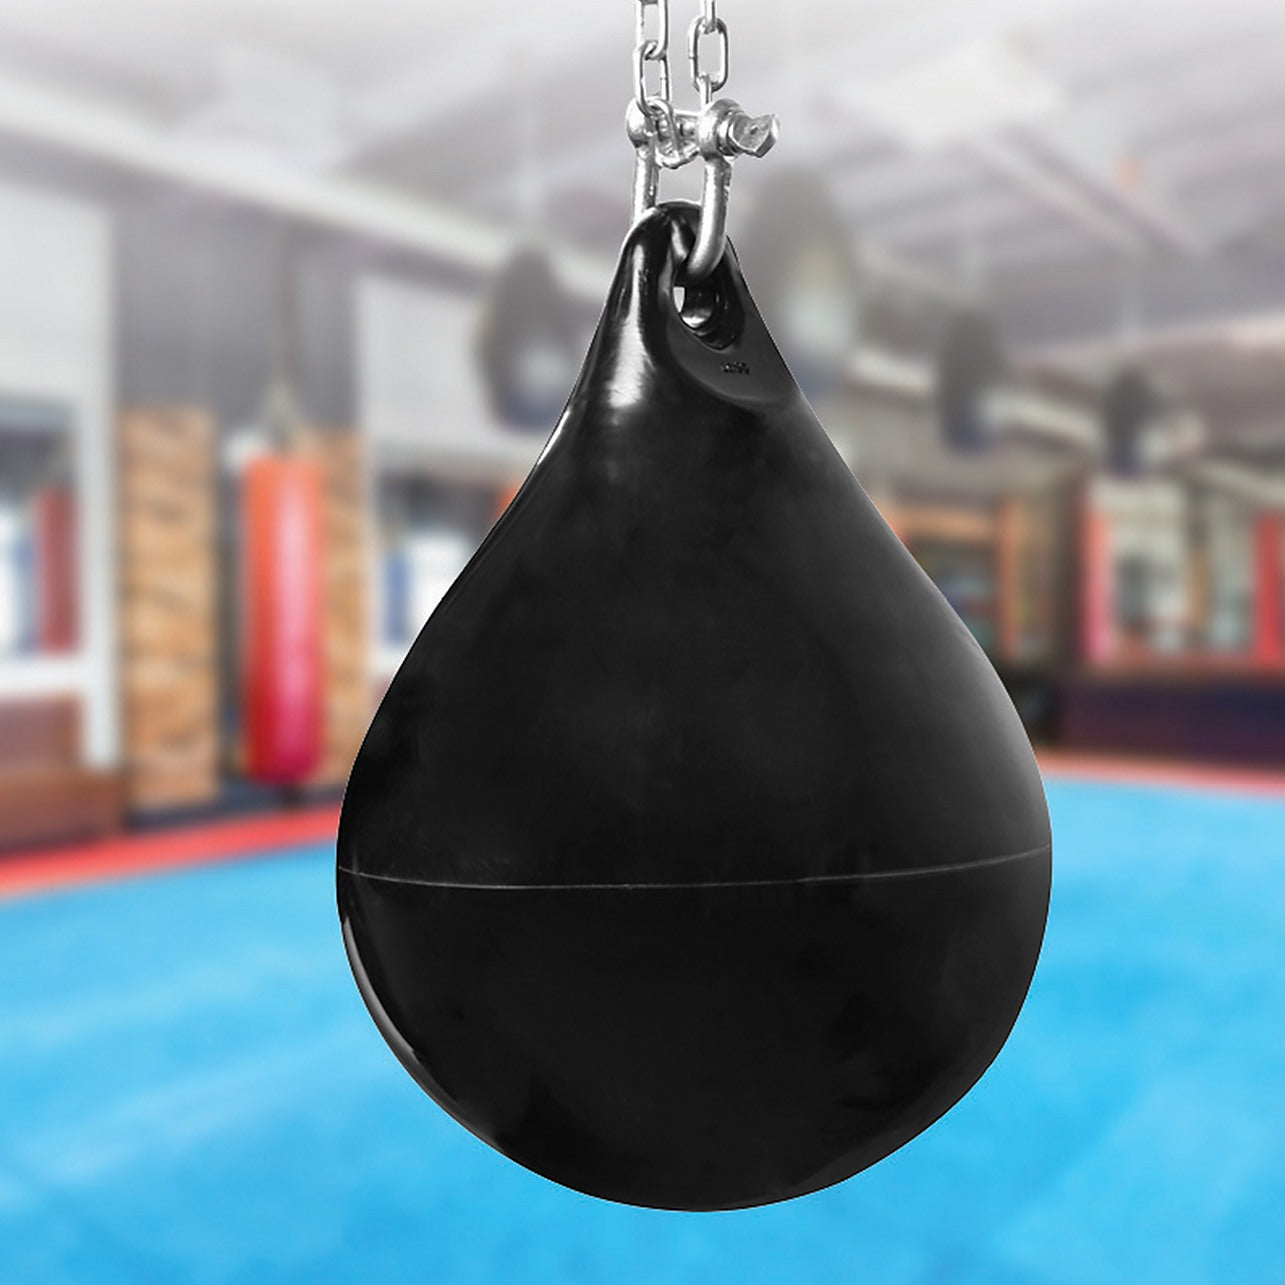 USI Universal Water Punch Bag 30cm Boxing Water Bag Water Punching Bag  Unfilled for Boxing Heavy Duty Water Bag for Punching Kickboxing MMA  Strength Sparring Training  Amazonin Sports Fitness  Outdoors